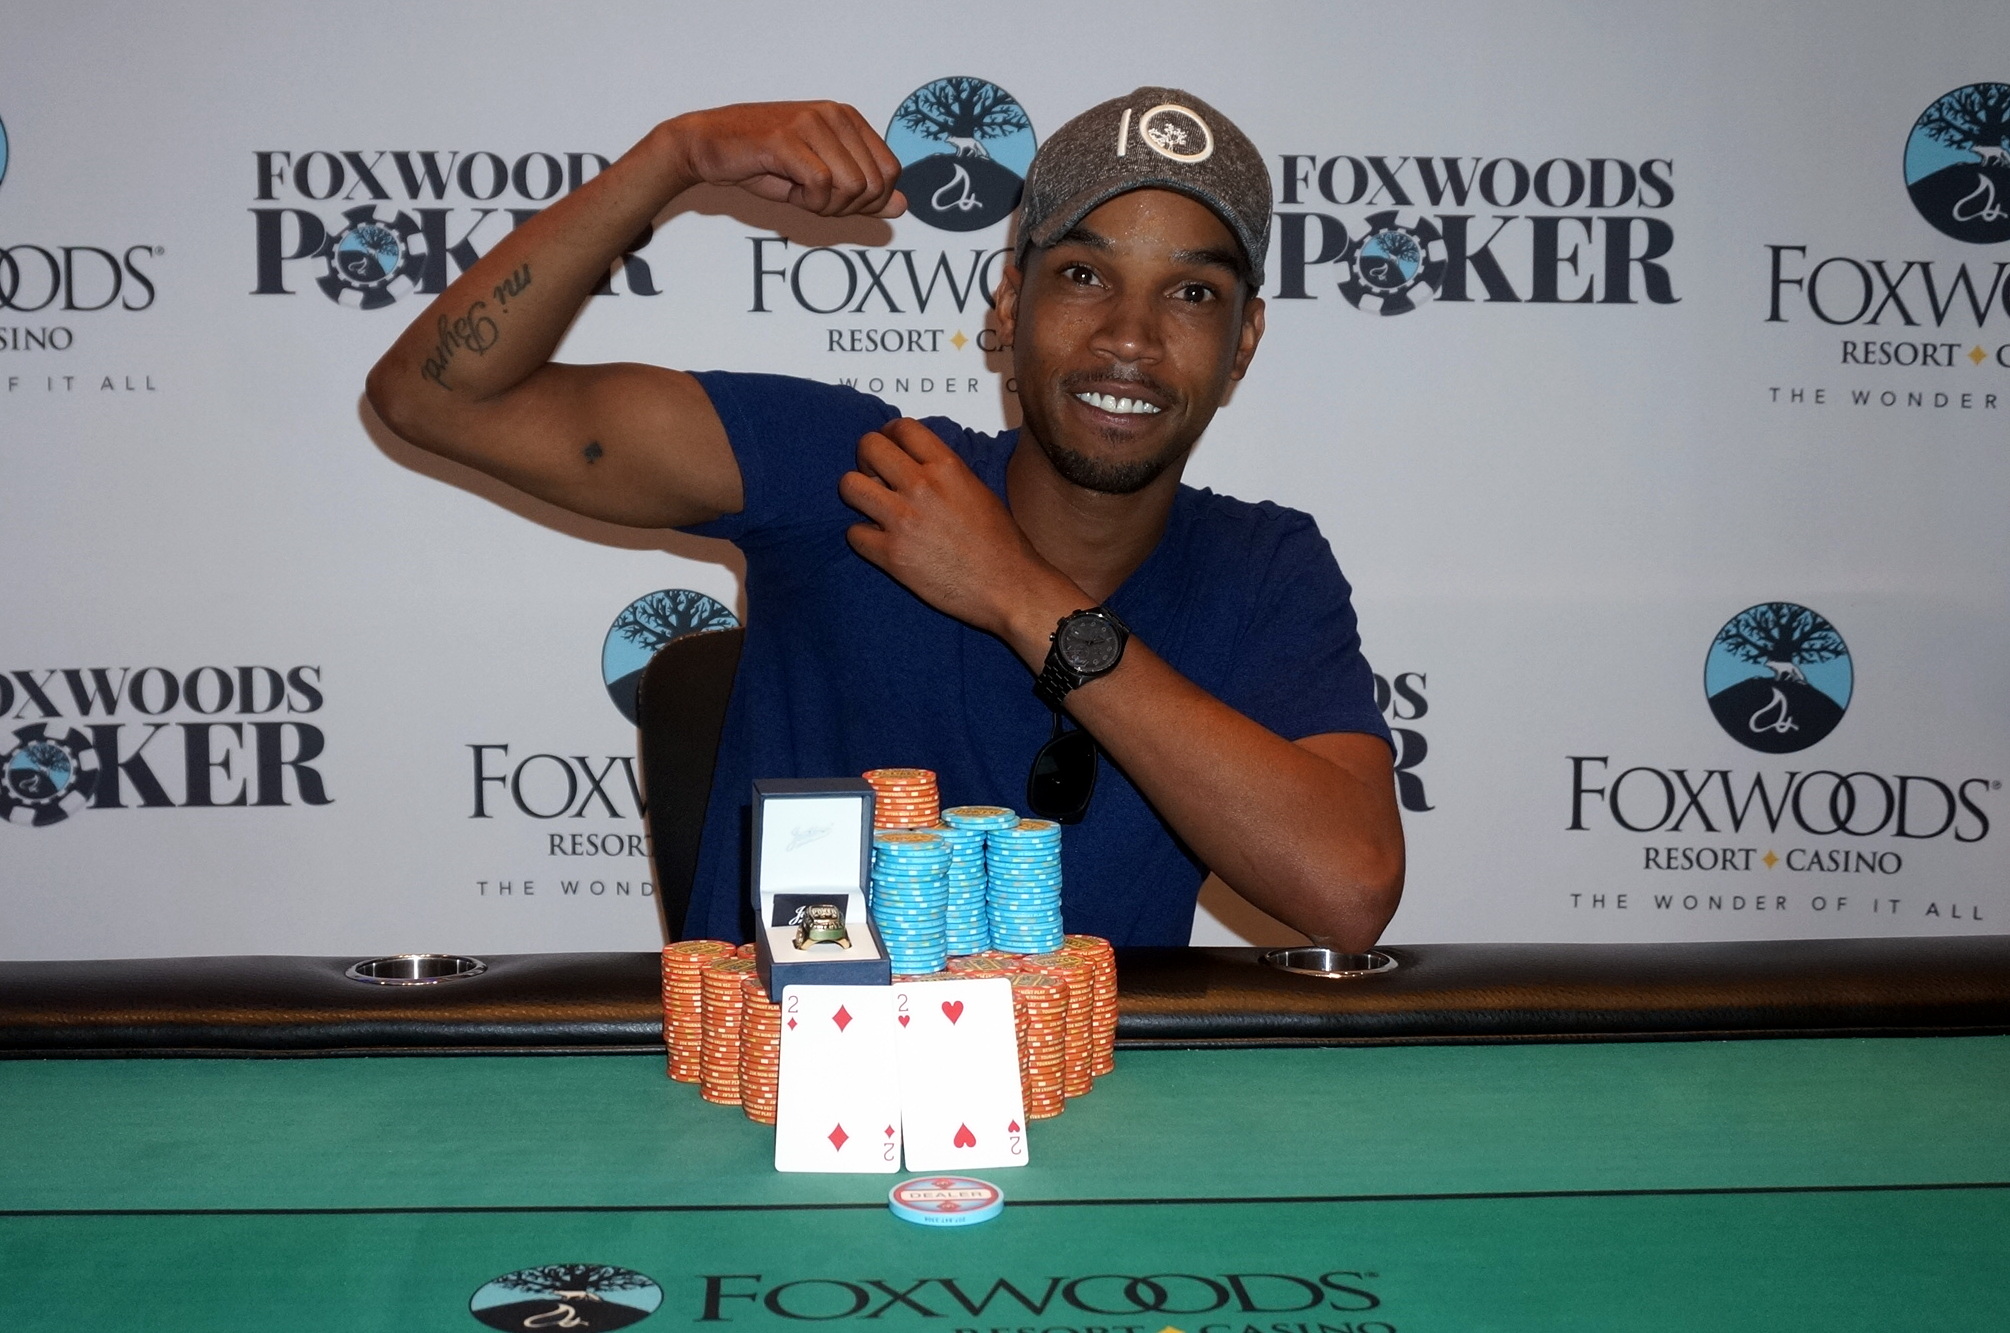 Jeremy Meacham Wins WSOP Foxwoods Main Event after Three Final Table Attempts